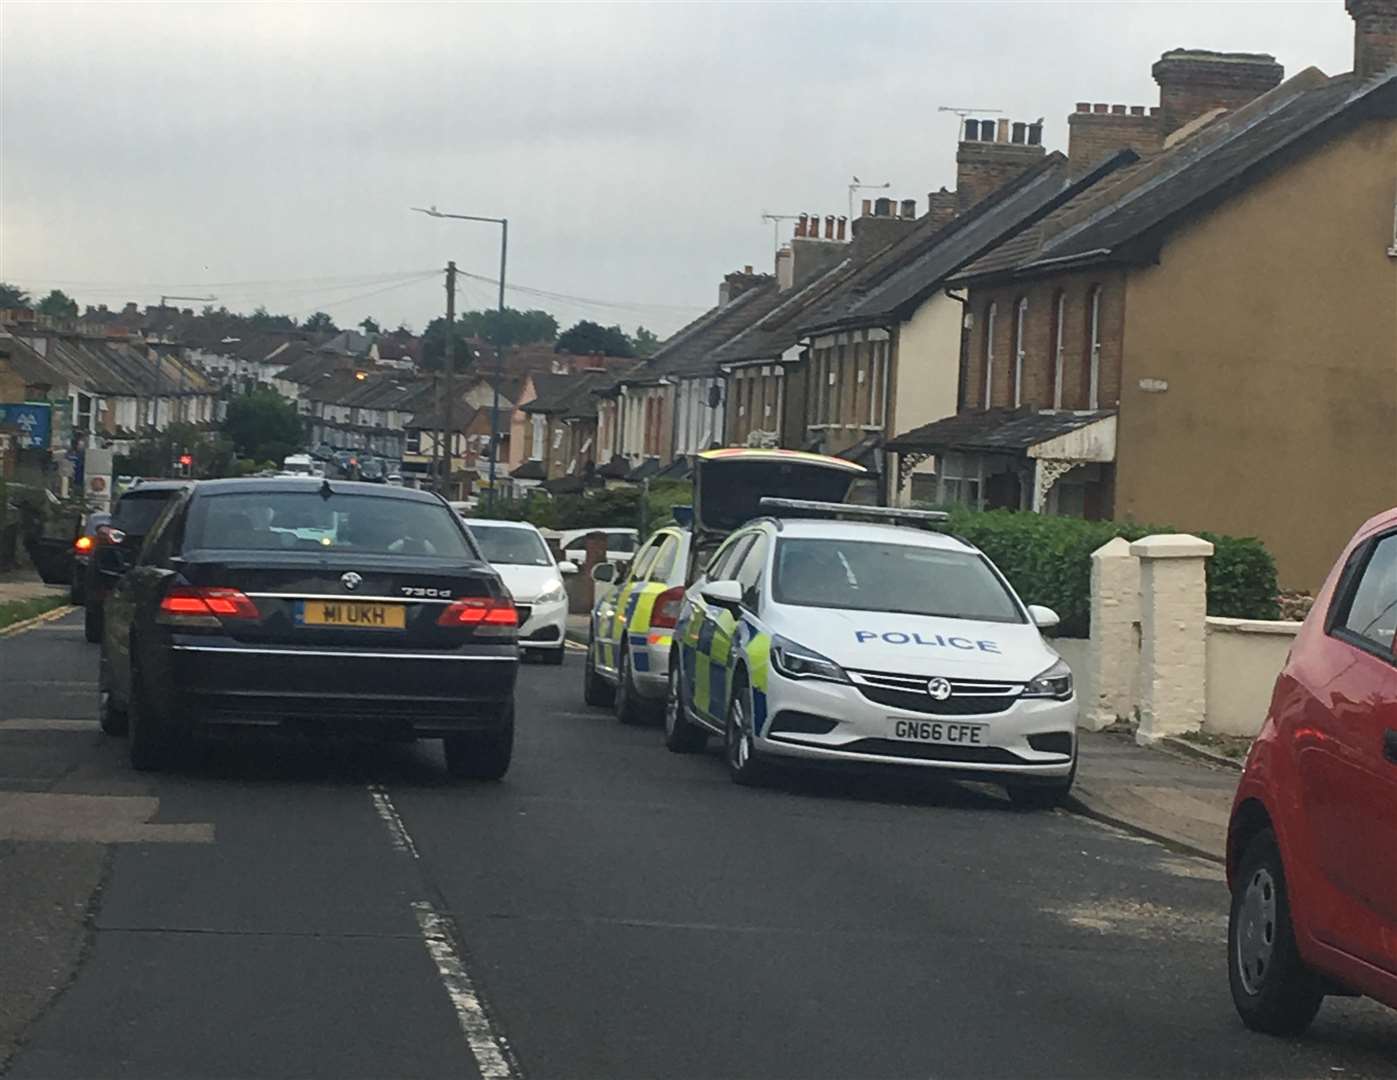 Police cars parked along Singlewell Road before 'raiding' the property on Old Road East